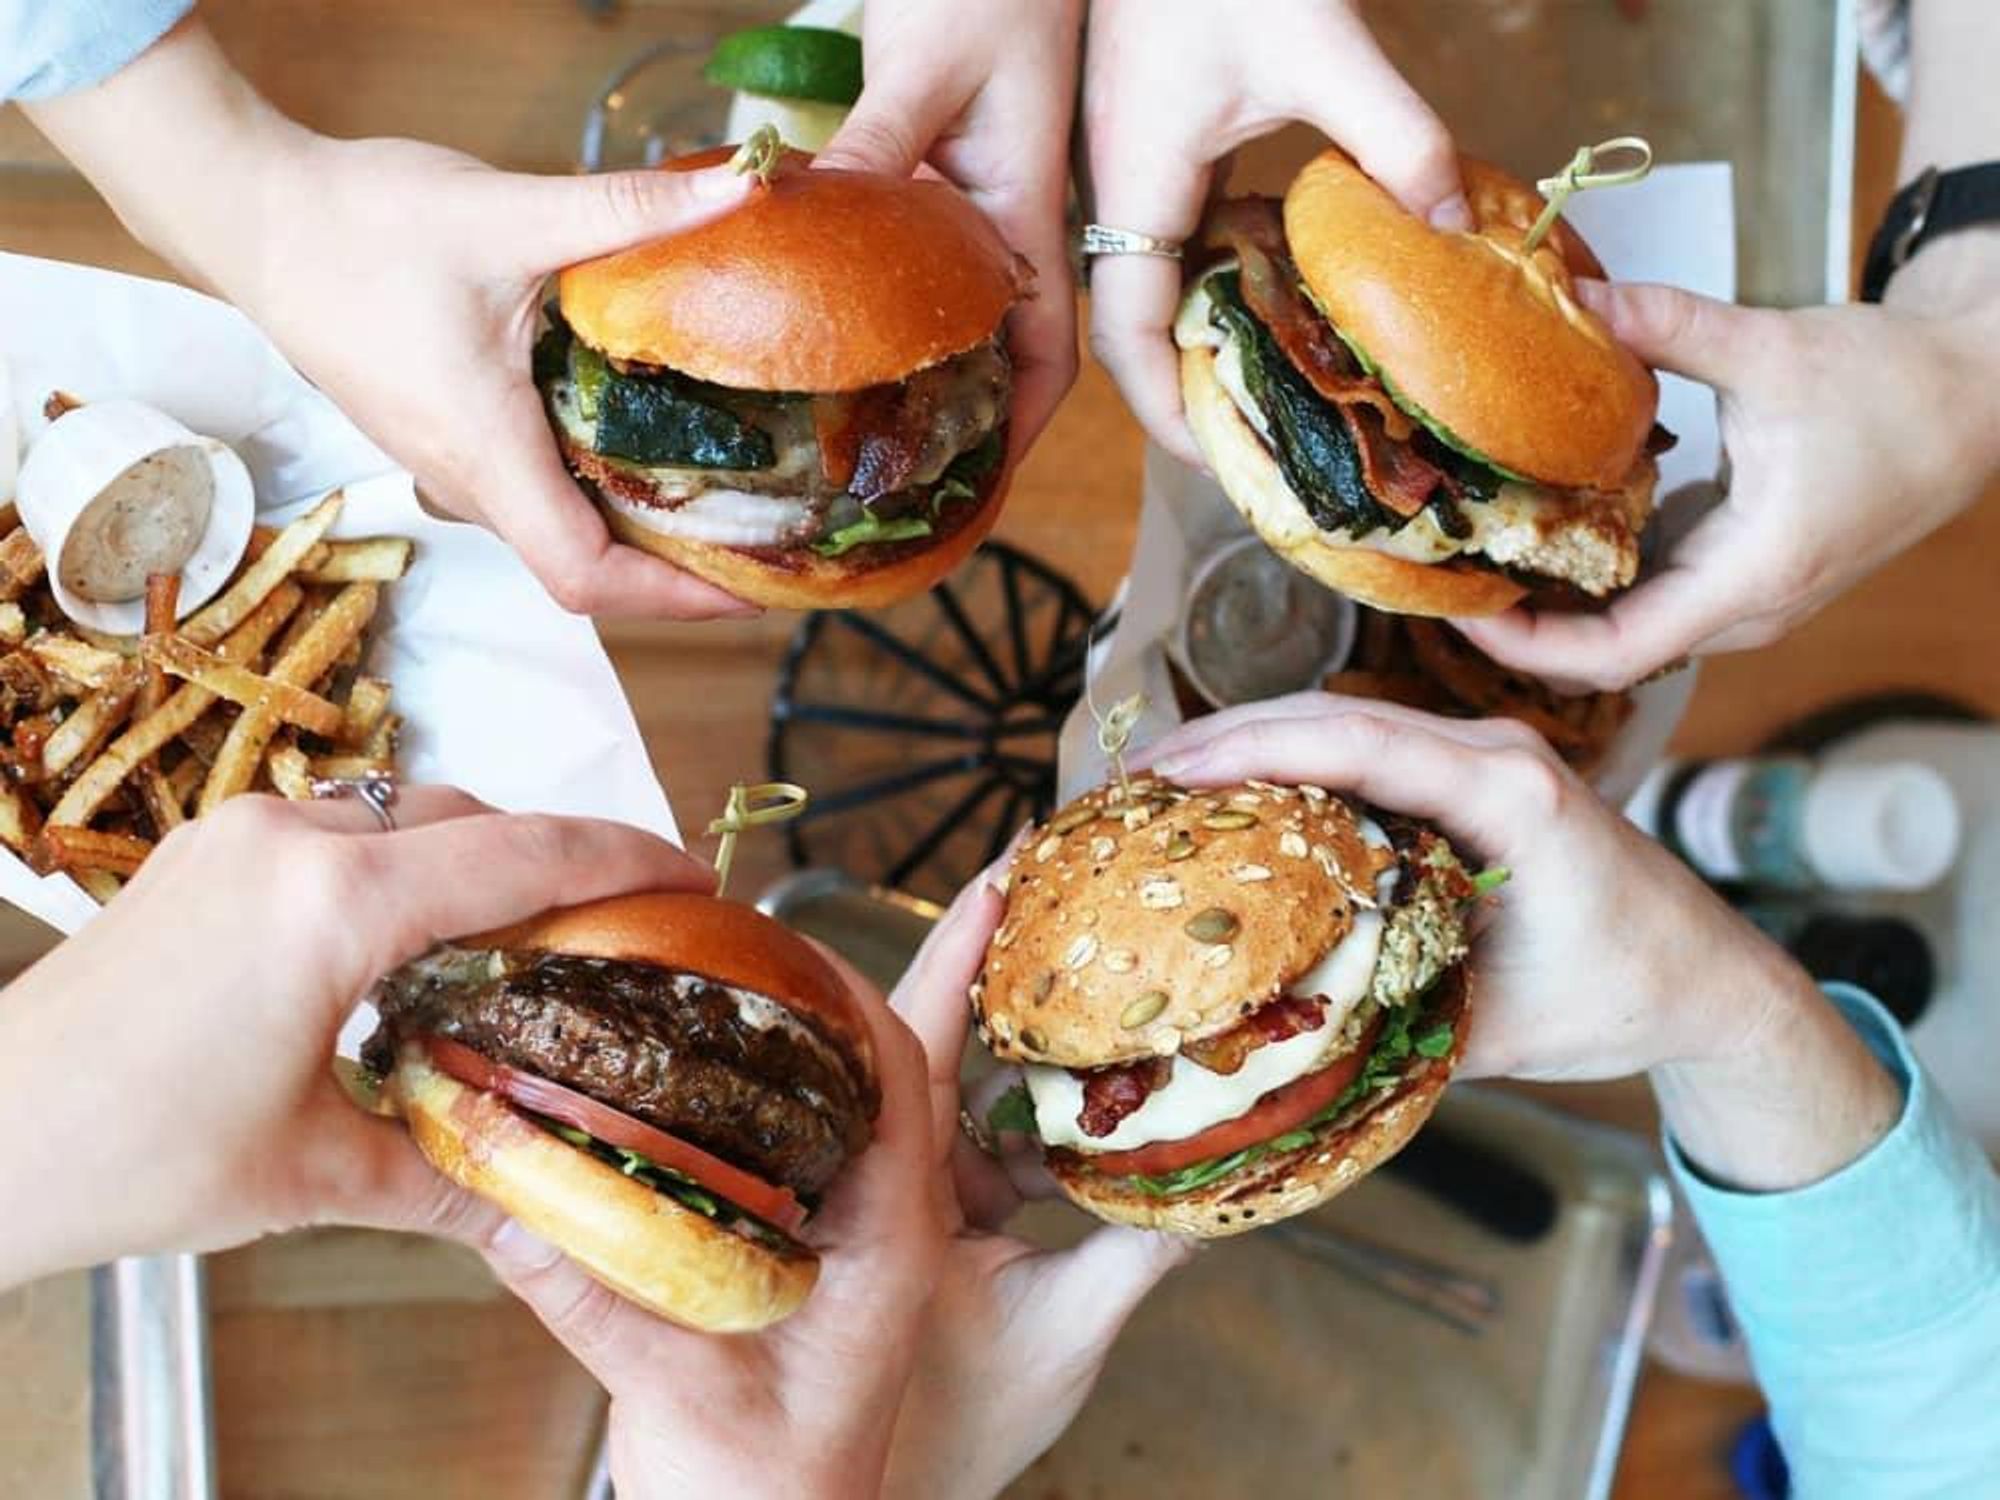 Burgers by Hopdoddy